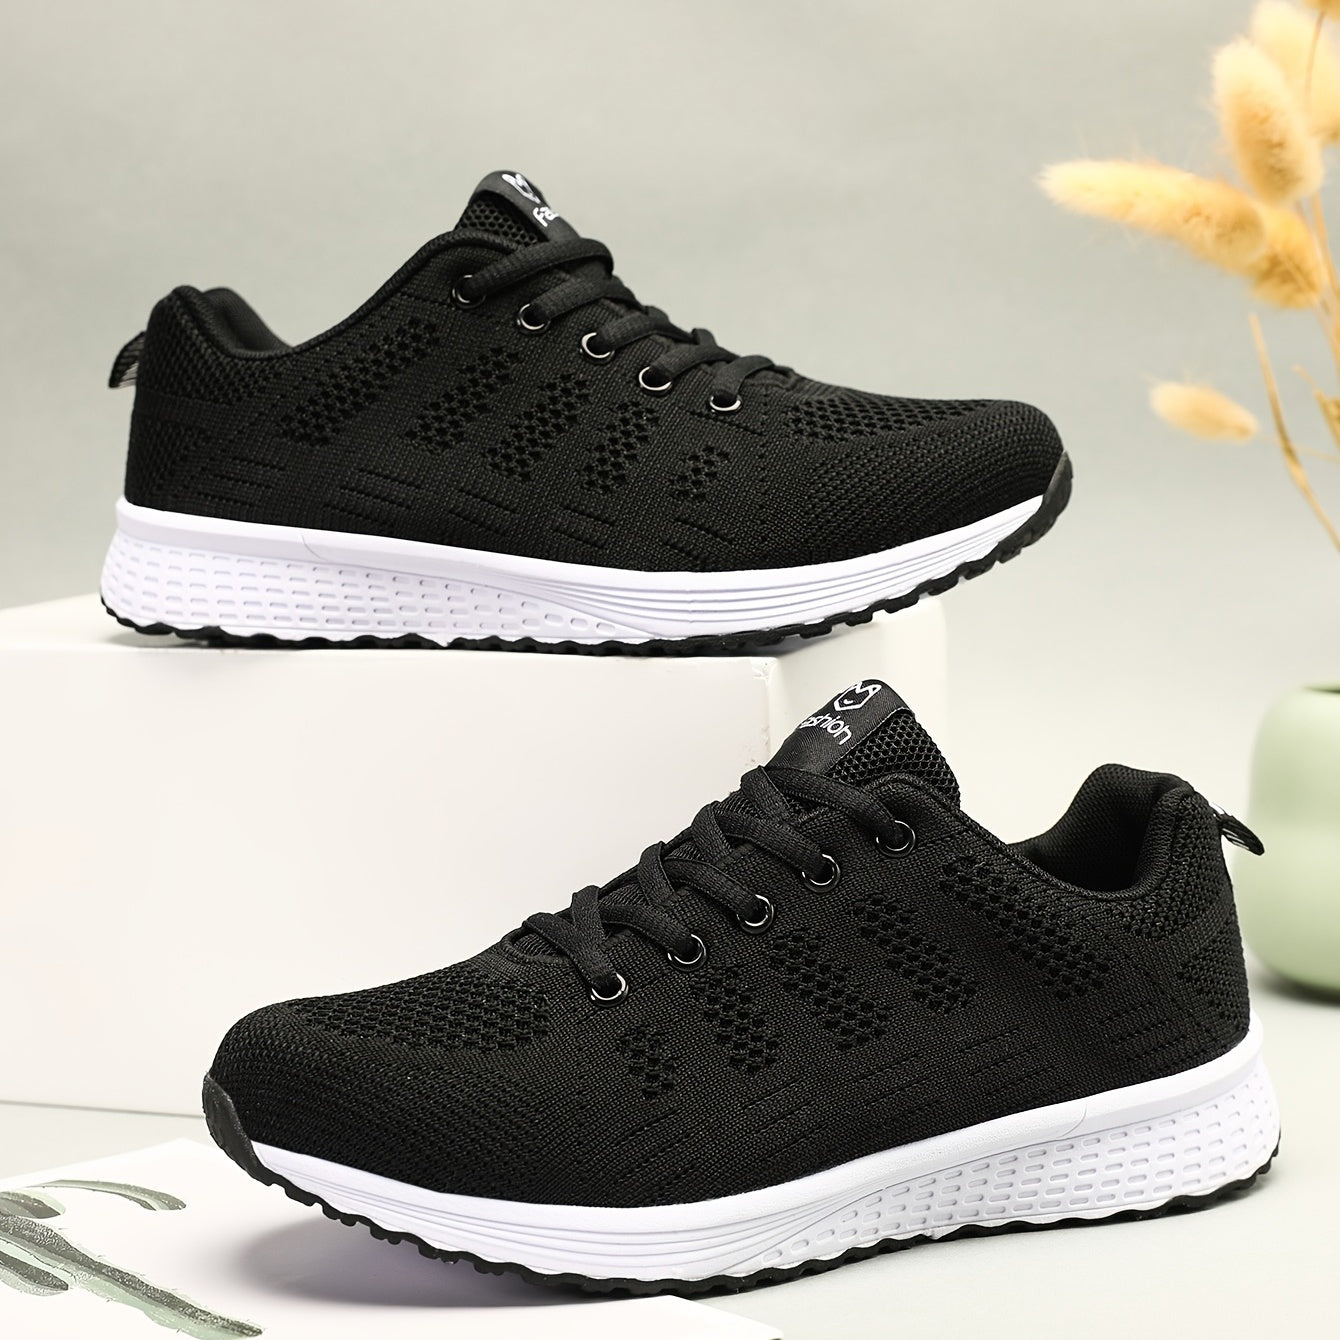 「binfenxie」Women's Leisure Knit Sneakers, Lightweight Low Top Lace Up Solid Color Casual Shoes, Women's Running Shoes